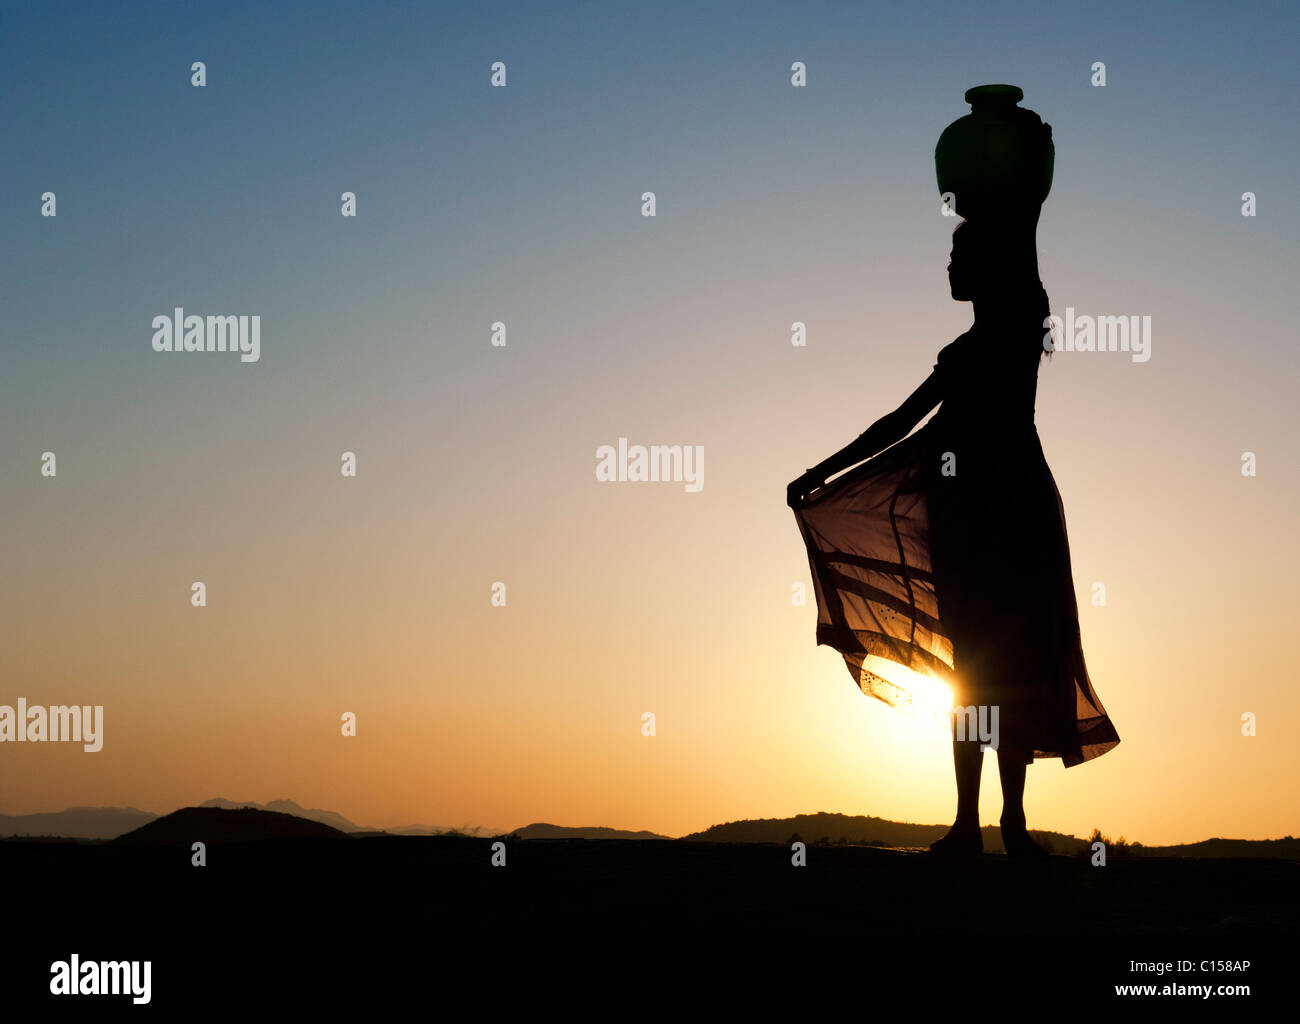 Rural Indian village girl balancing a water pot on her head at sunset. Silhouette. Andhra Pradesh, India Stock Photo